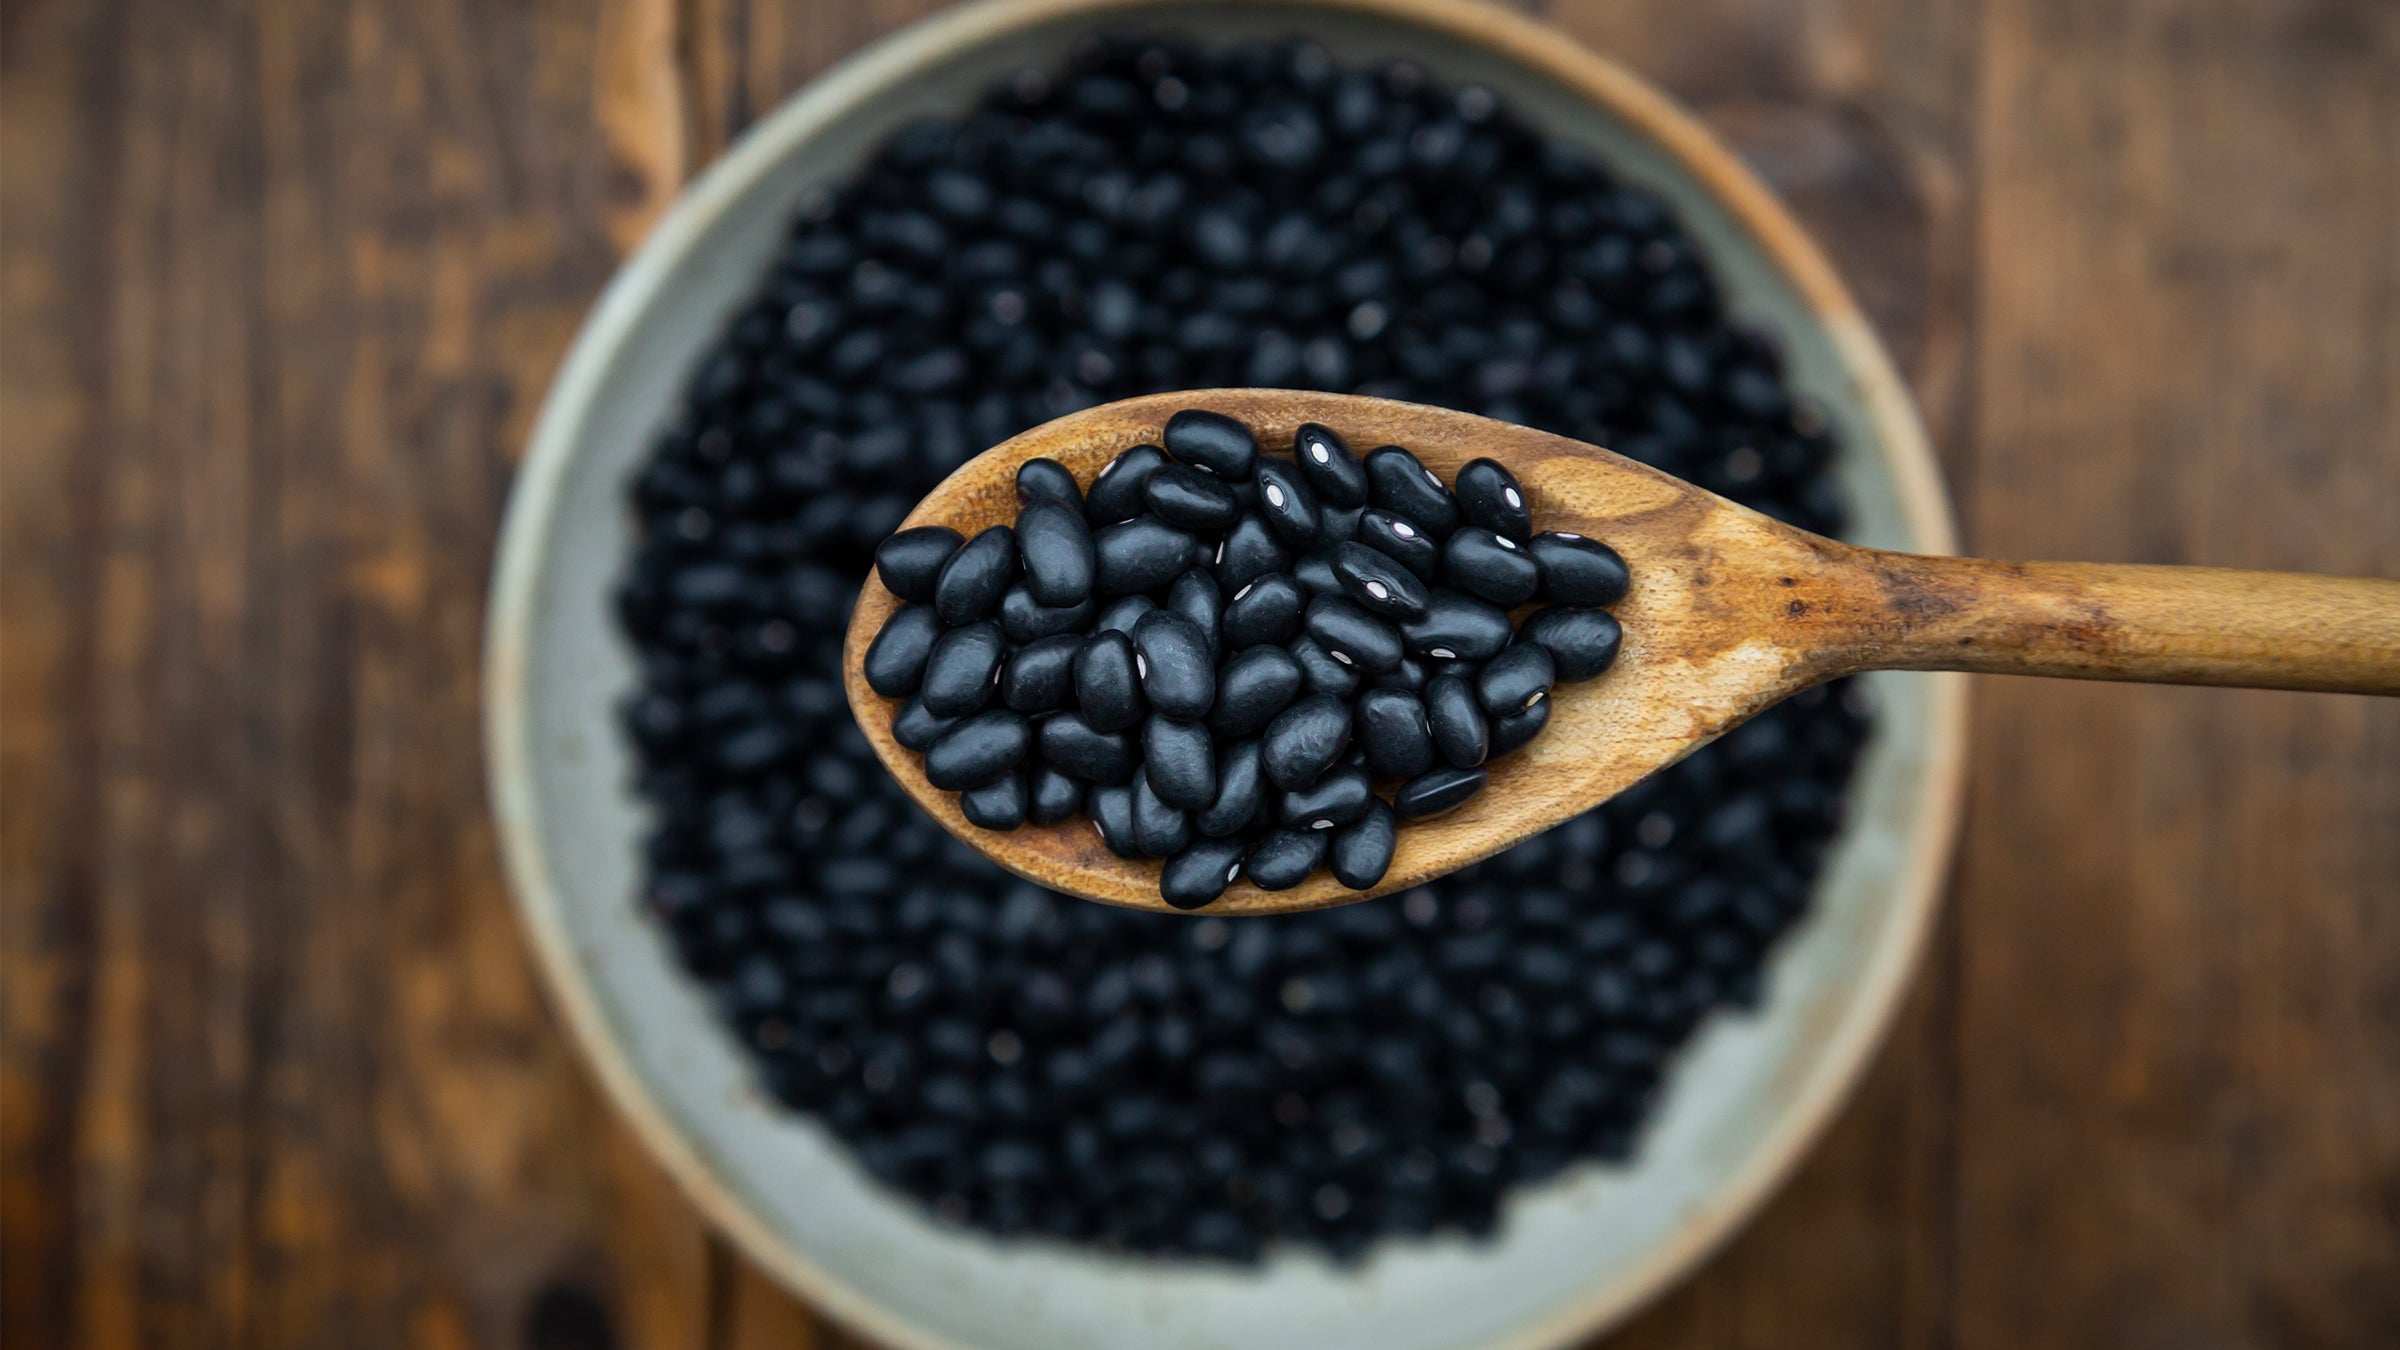 Eat Black Beans for Your Health